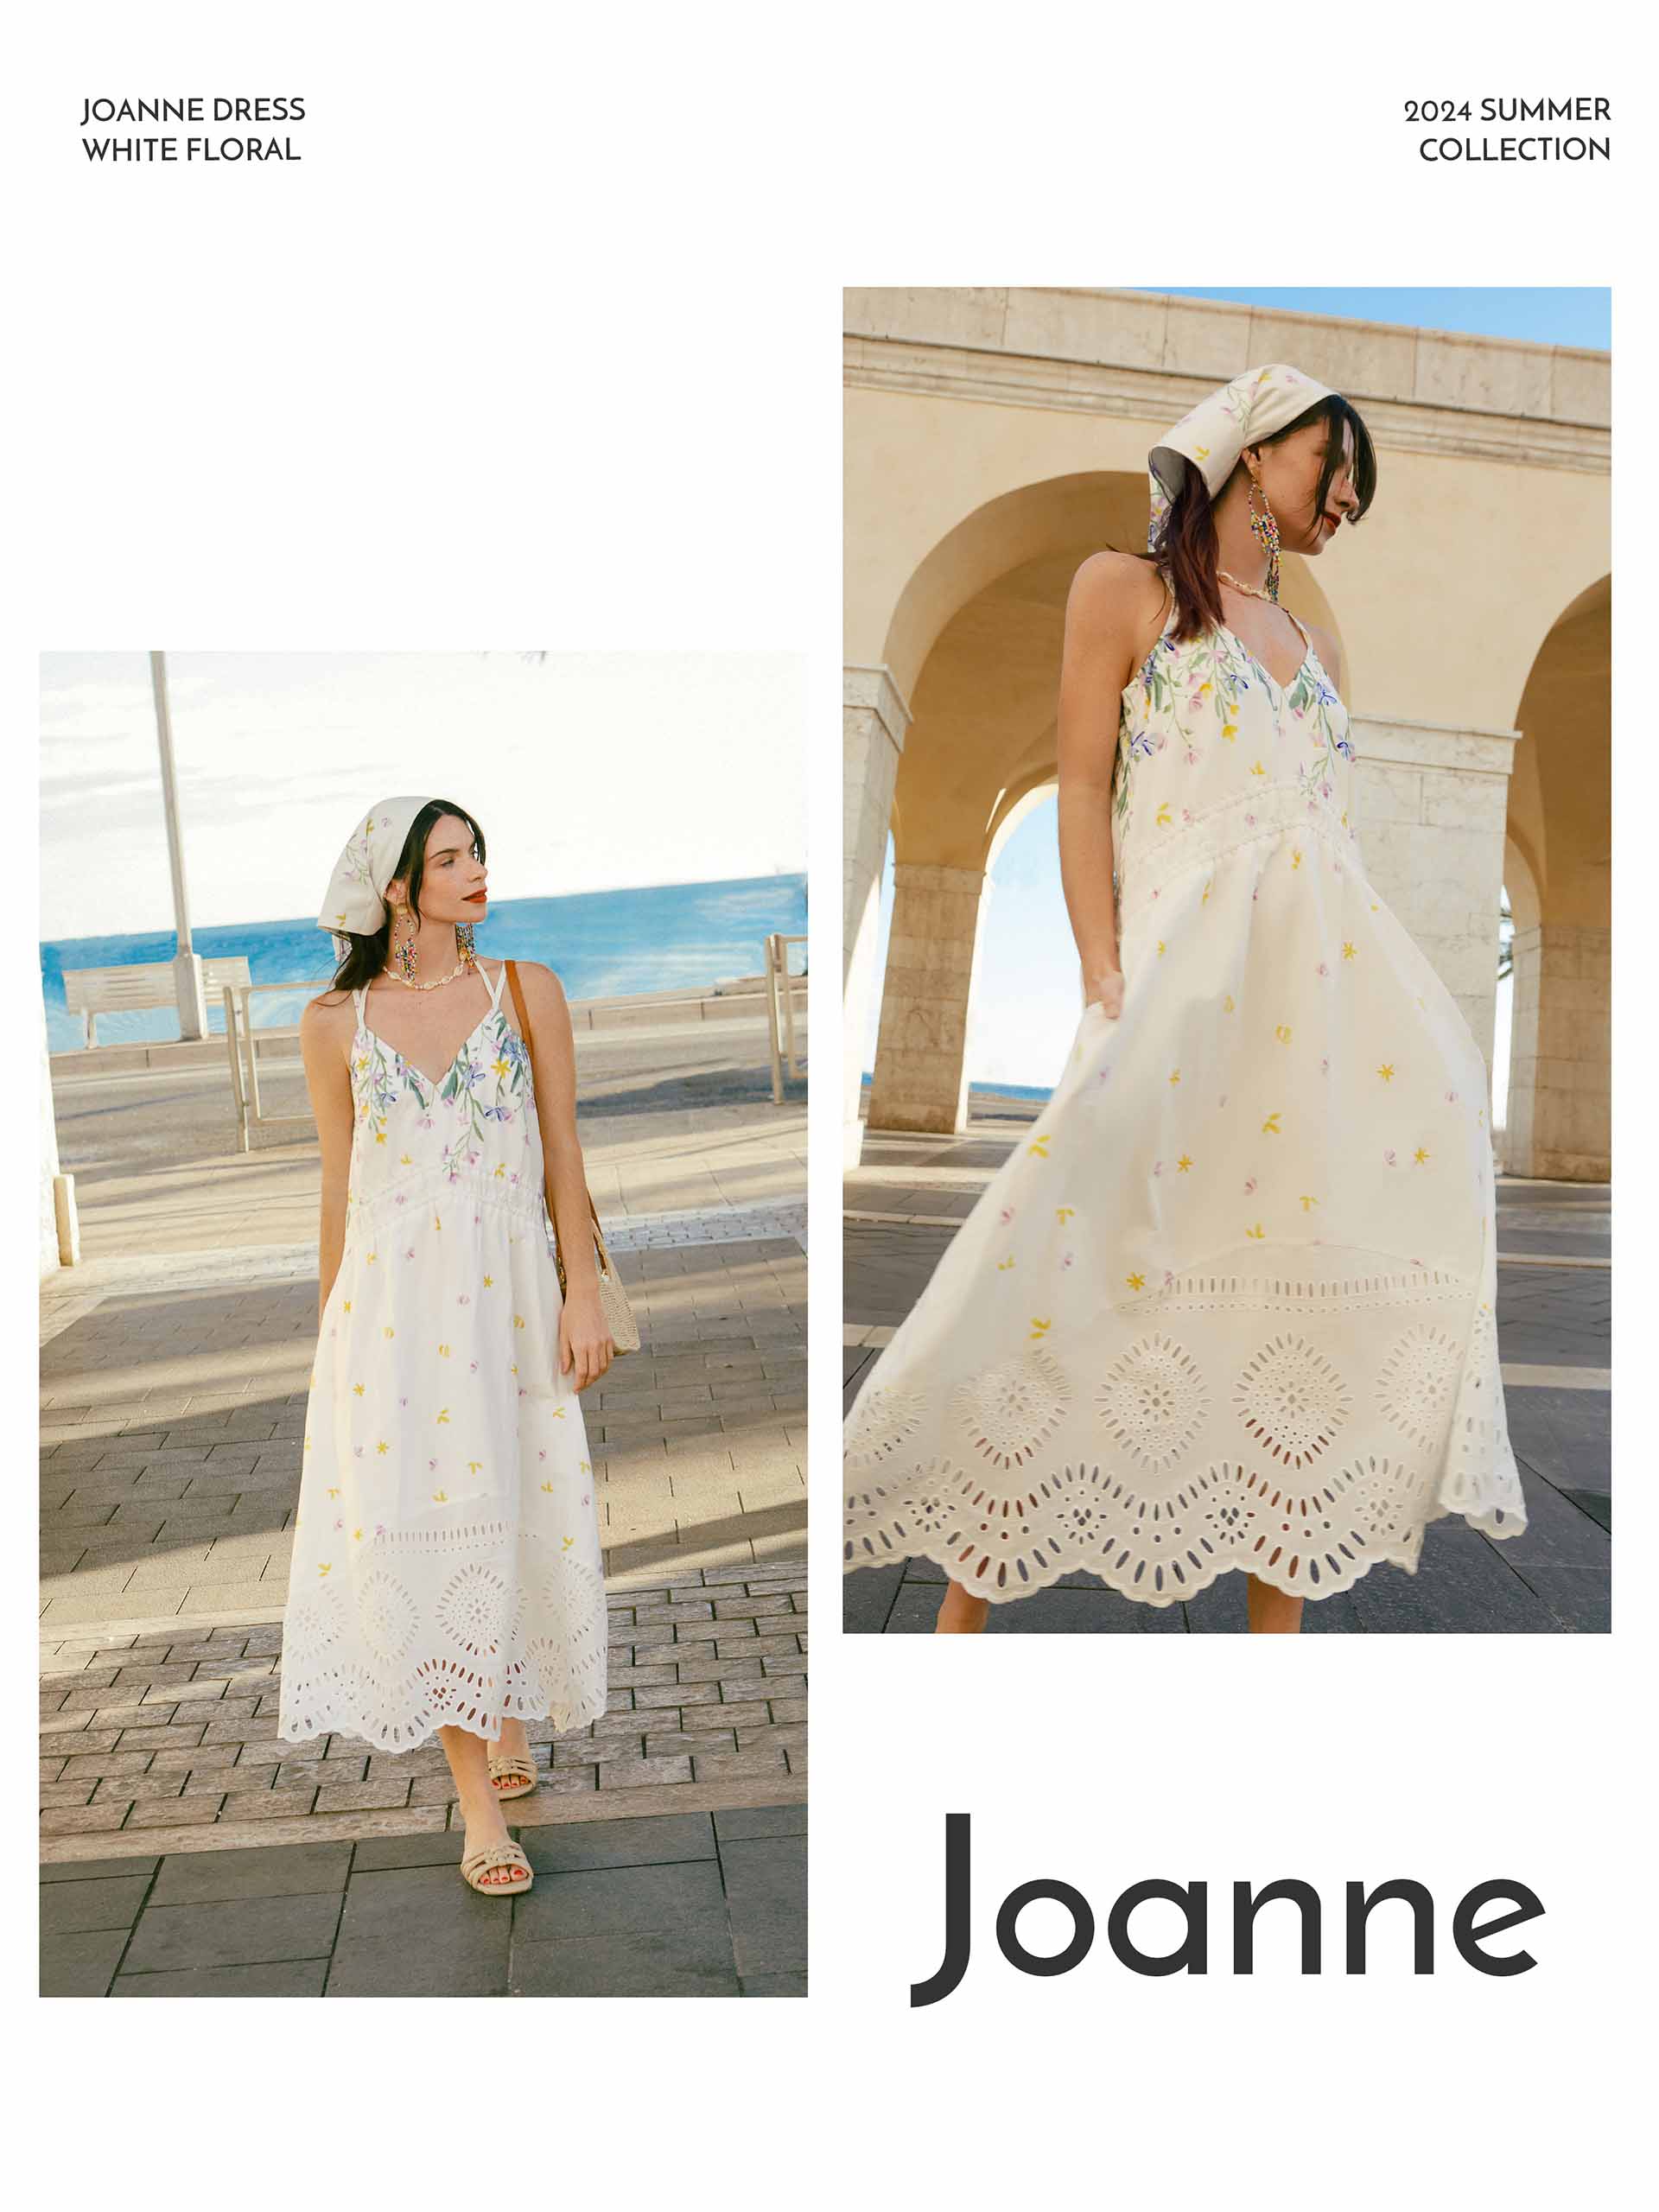 2024 Summer Collection - Petite Studio NYC - Joanne Dress in White Floral